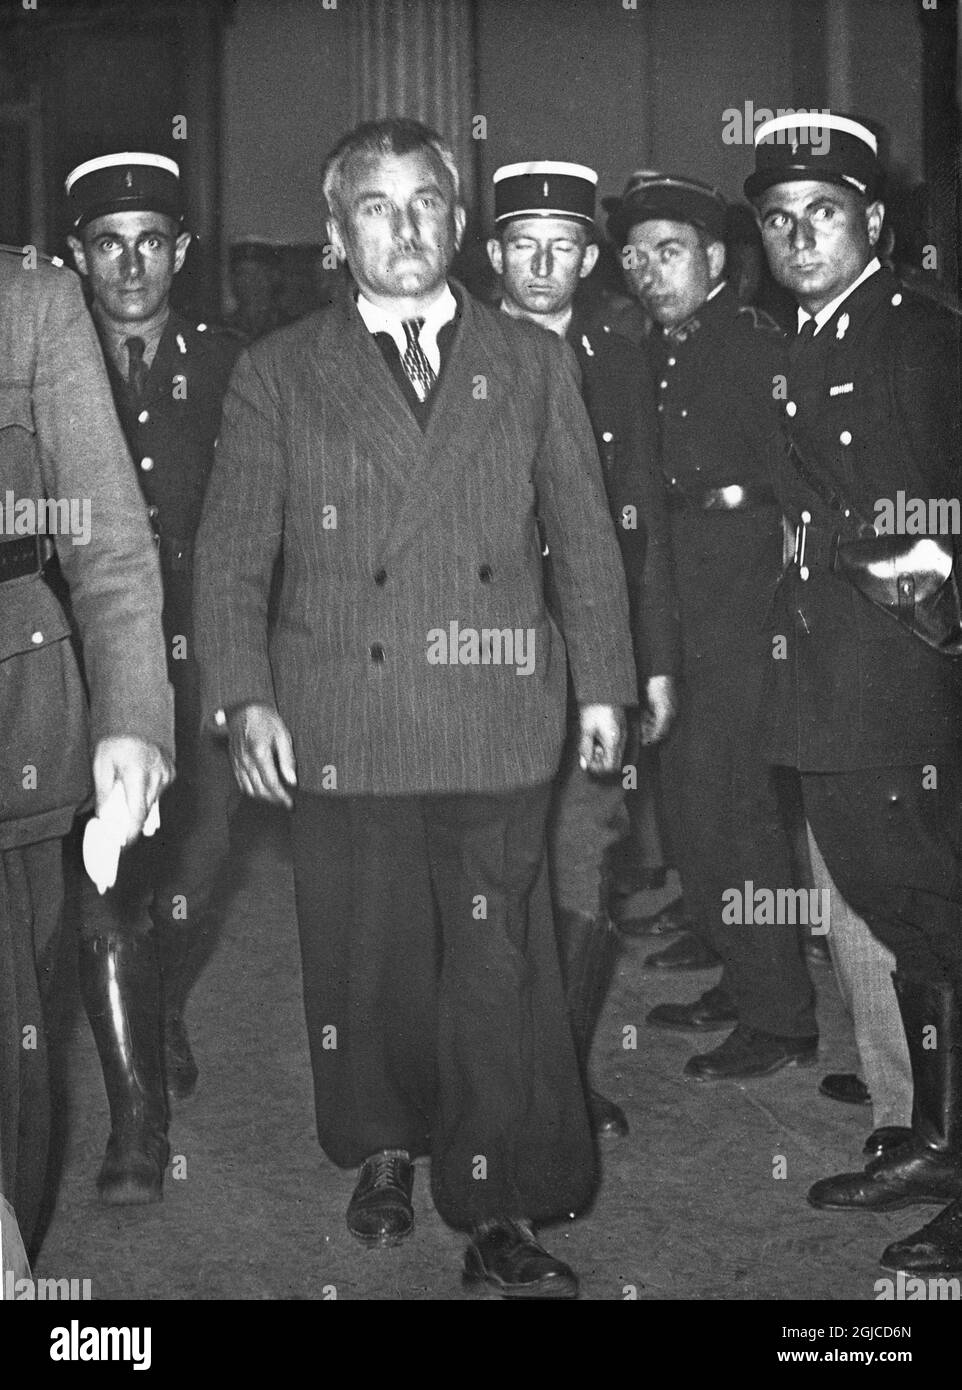 PARIS, FRANCE 1945-08-09 Joseph Darnand, Secretary-General of the Vichy France militia and Secretary of State for maintenance of order during the last year of the Vichy regime, and a Major in the Waffen SS arrives at Palais de Justice in Paris August 9 1945. He was eventually condemned to death for treason. Photo: AB Text & Bilder / SVT / Kod: 5600  Stock Photo